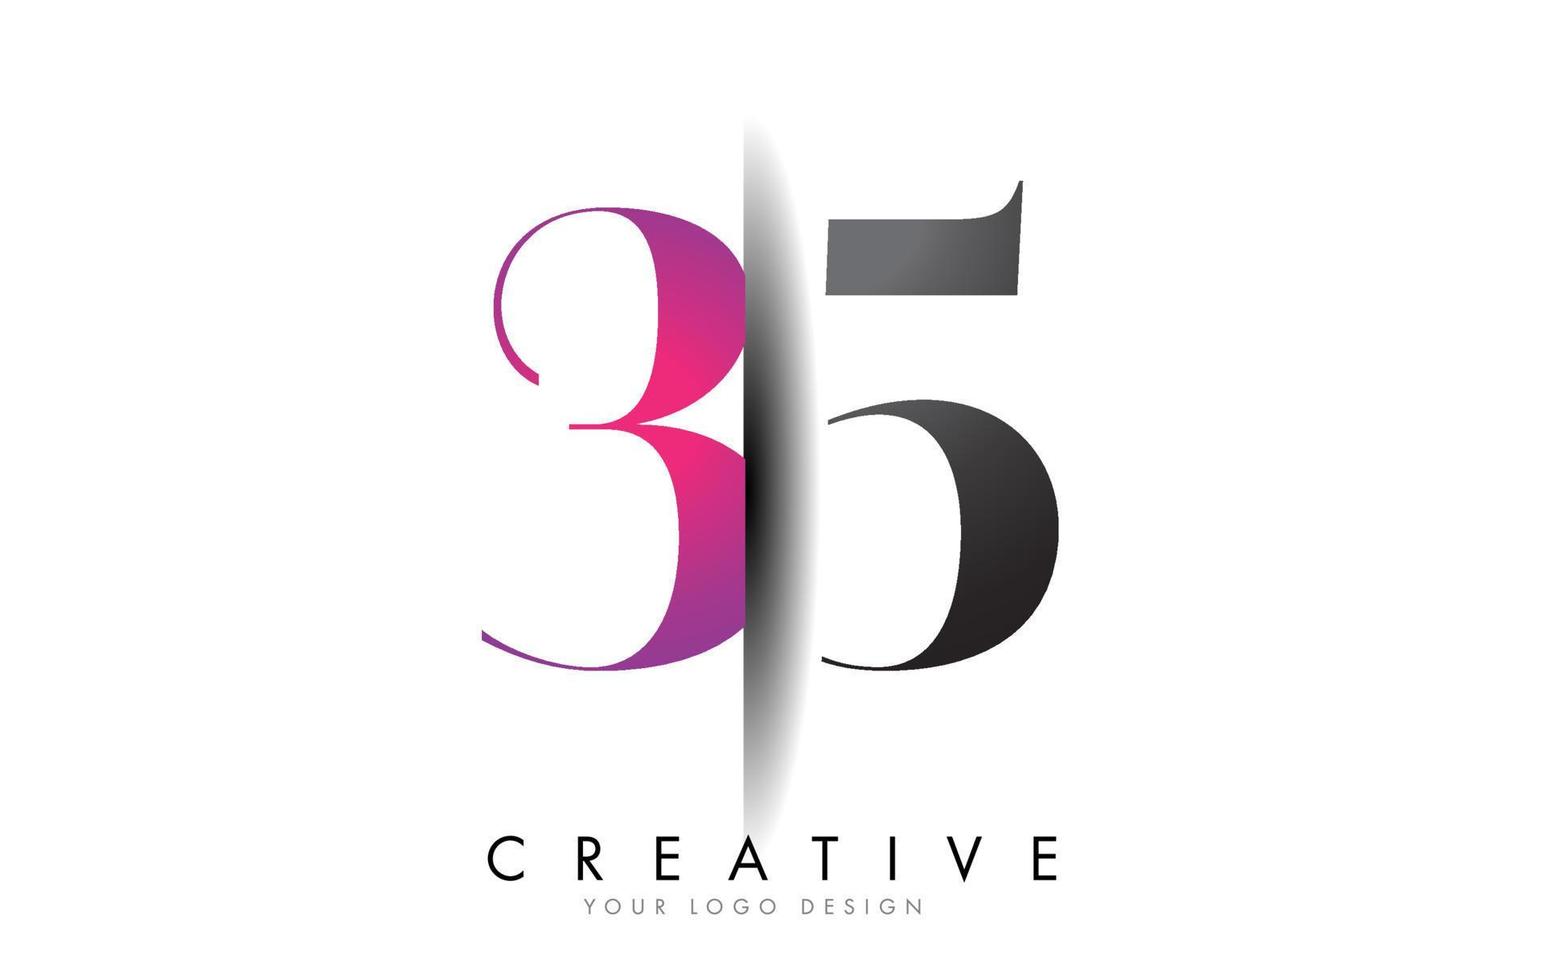 35 3 5 Grey and Pink Number Logo with Creative Shadow Cut Vector. vector